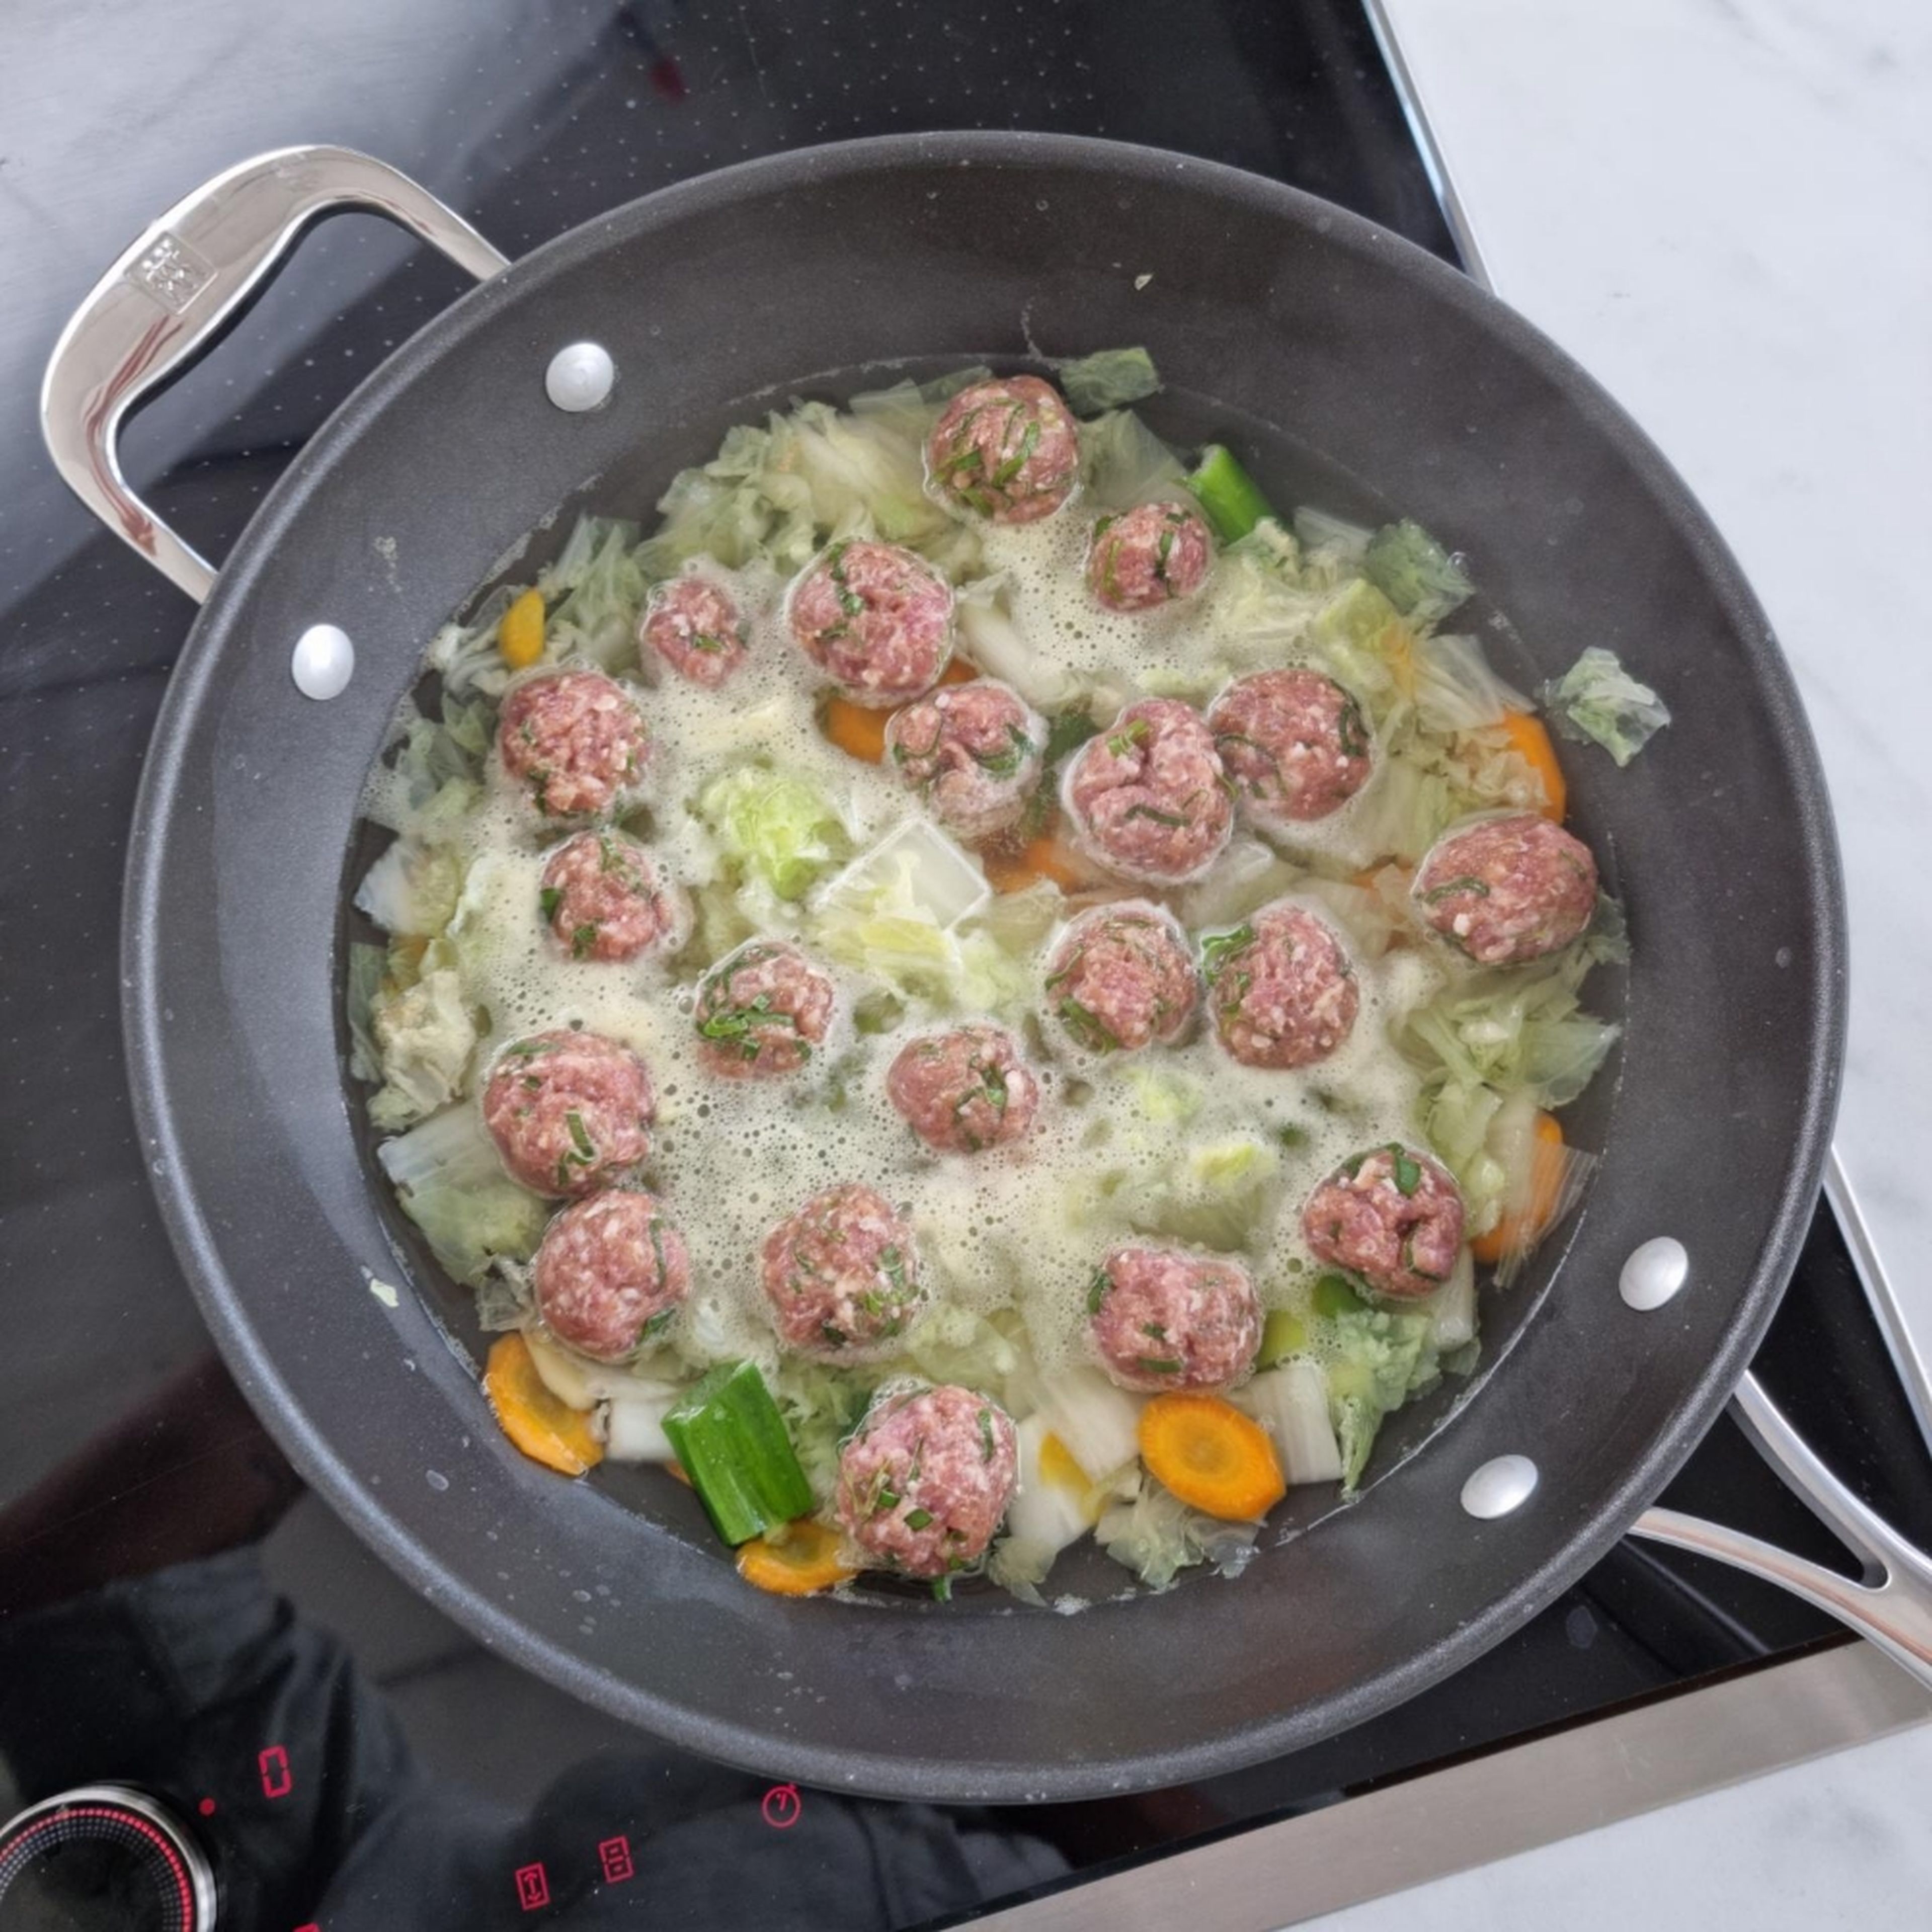 Carefully drop the meatballs one by one into the boiling soup and let simmer for about 5 min.